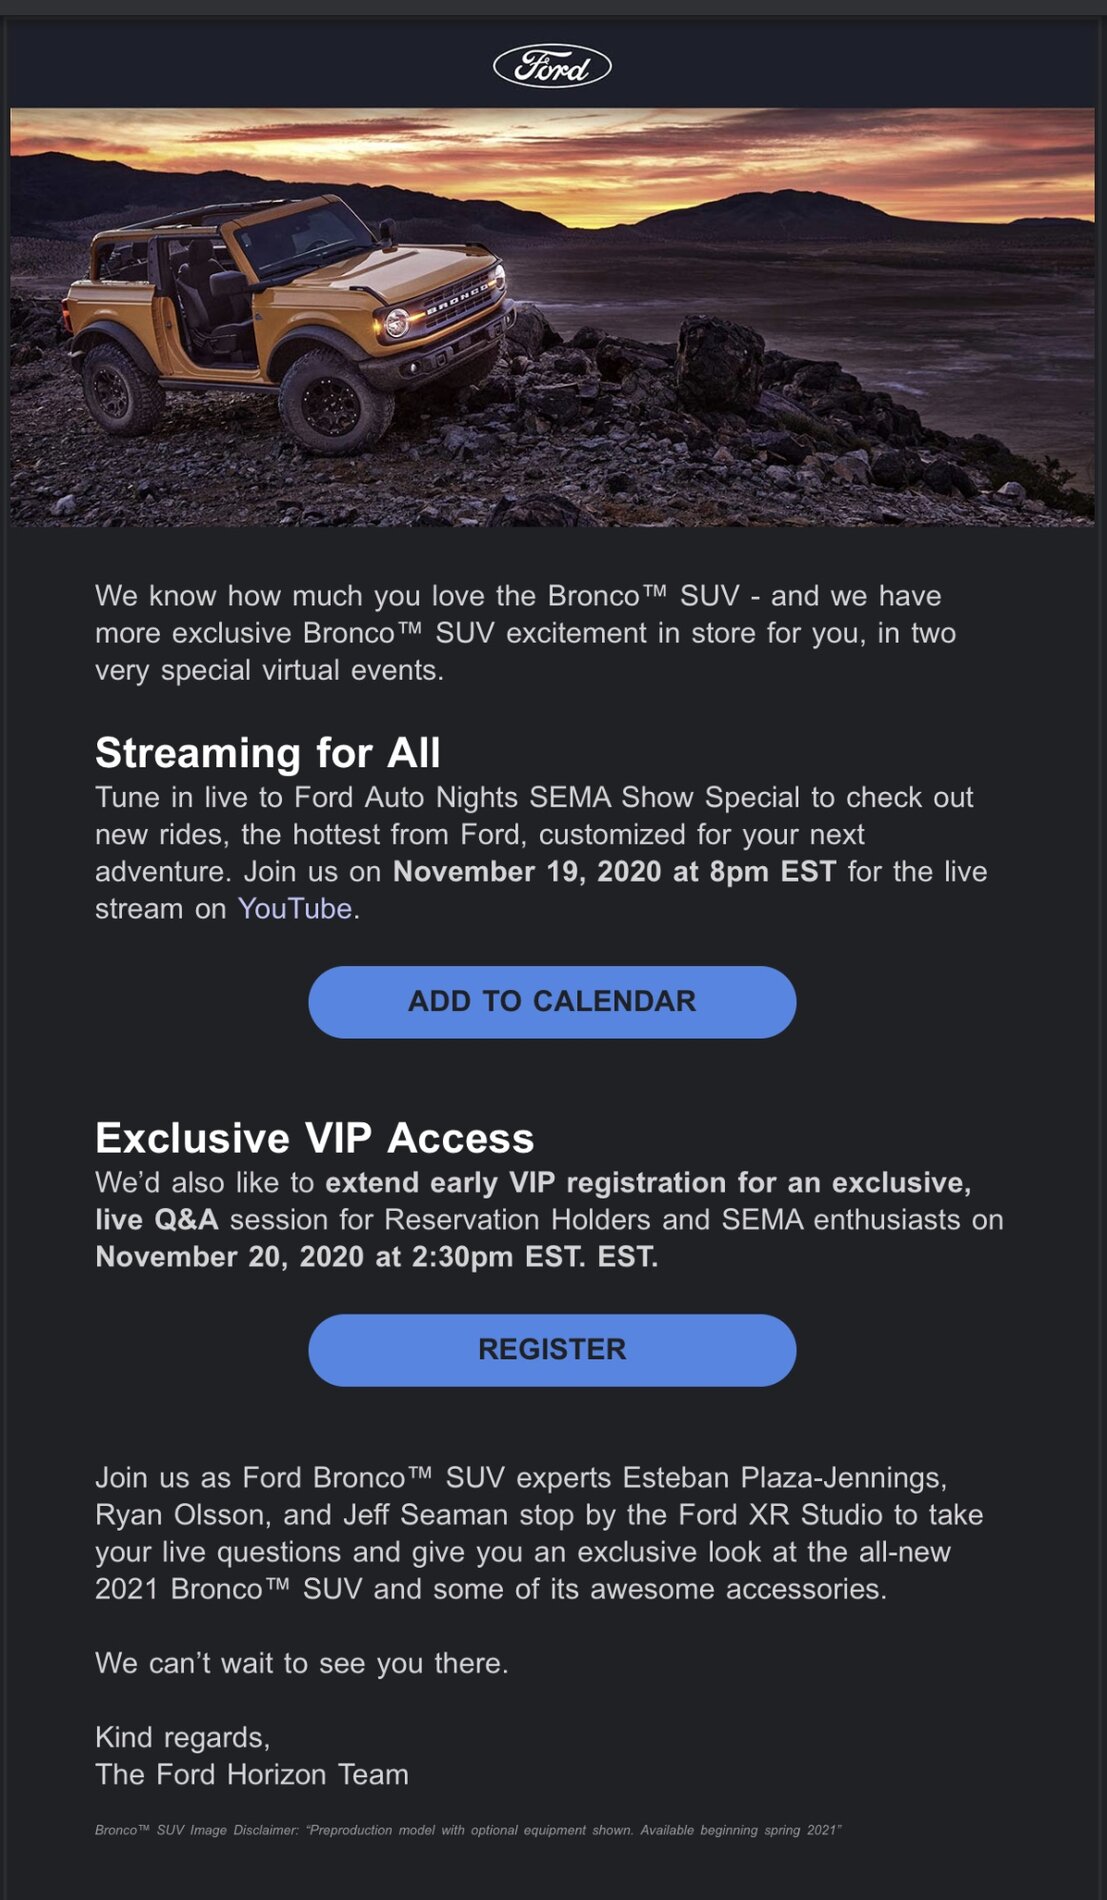 Ford Bronco Did anyone get an email from “Ford Horizon” about SEMA VIP Q&A? 9876CFFC-81A7-4F1A-9E9F-A34A5291F429